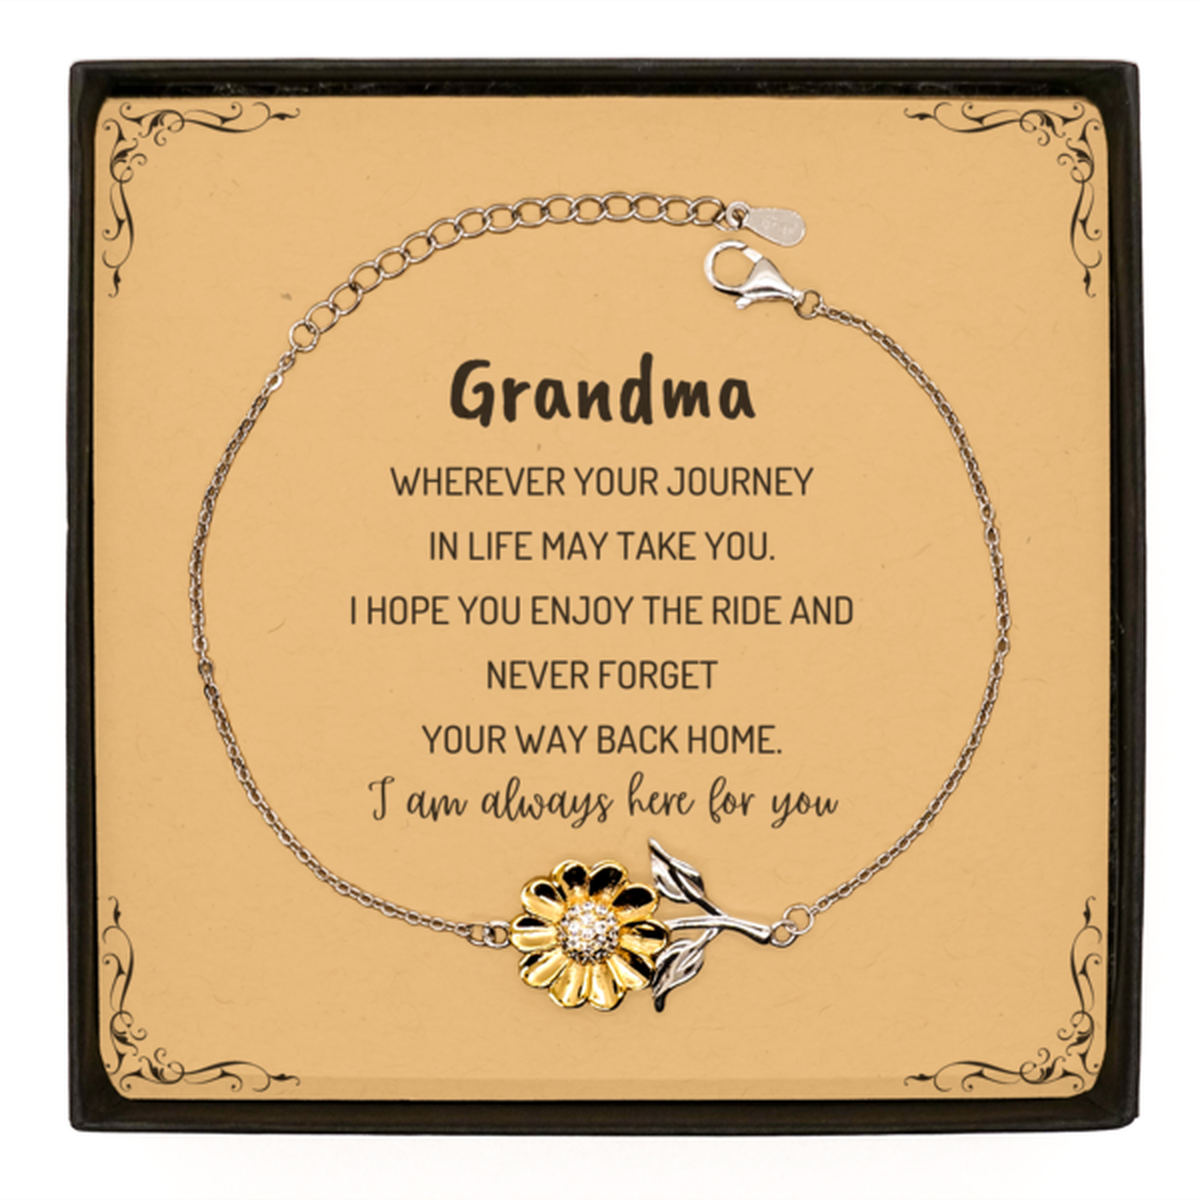 Grandma wherever your journey in life may take you, I am always here for you Grandma Sunflower Bracelet, Awesome Christmas Gifts For Grandma Message Card, Grandma Birthday Gifts for Men Women Family Loved One